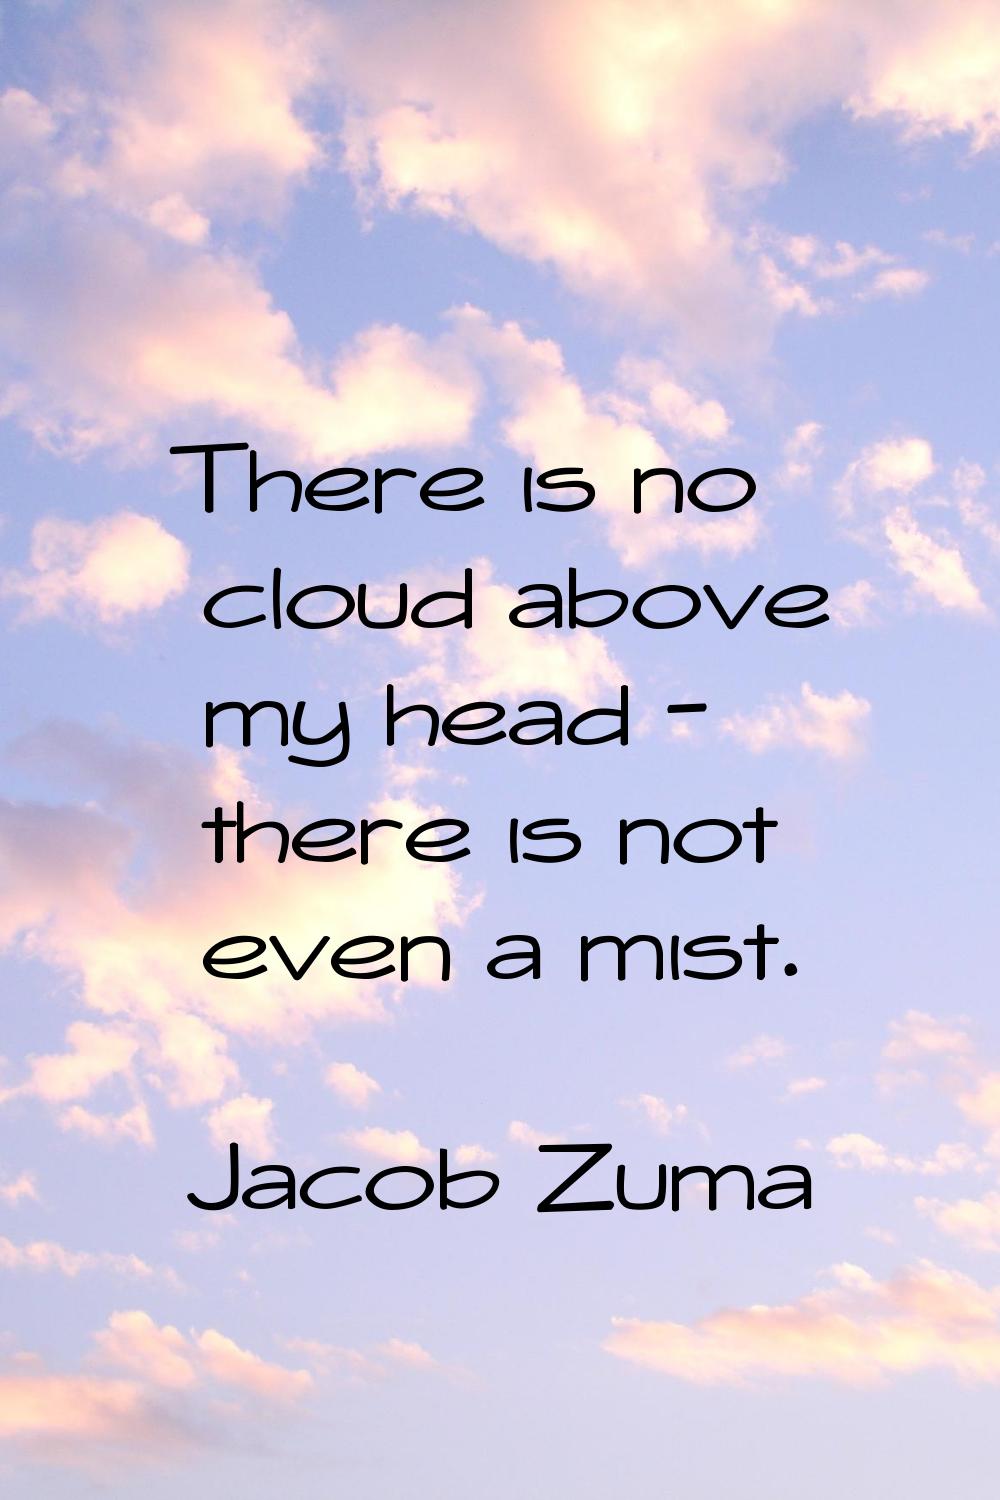 There is no cloud above my head - there is not even a mist.